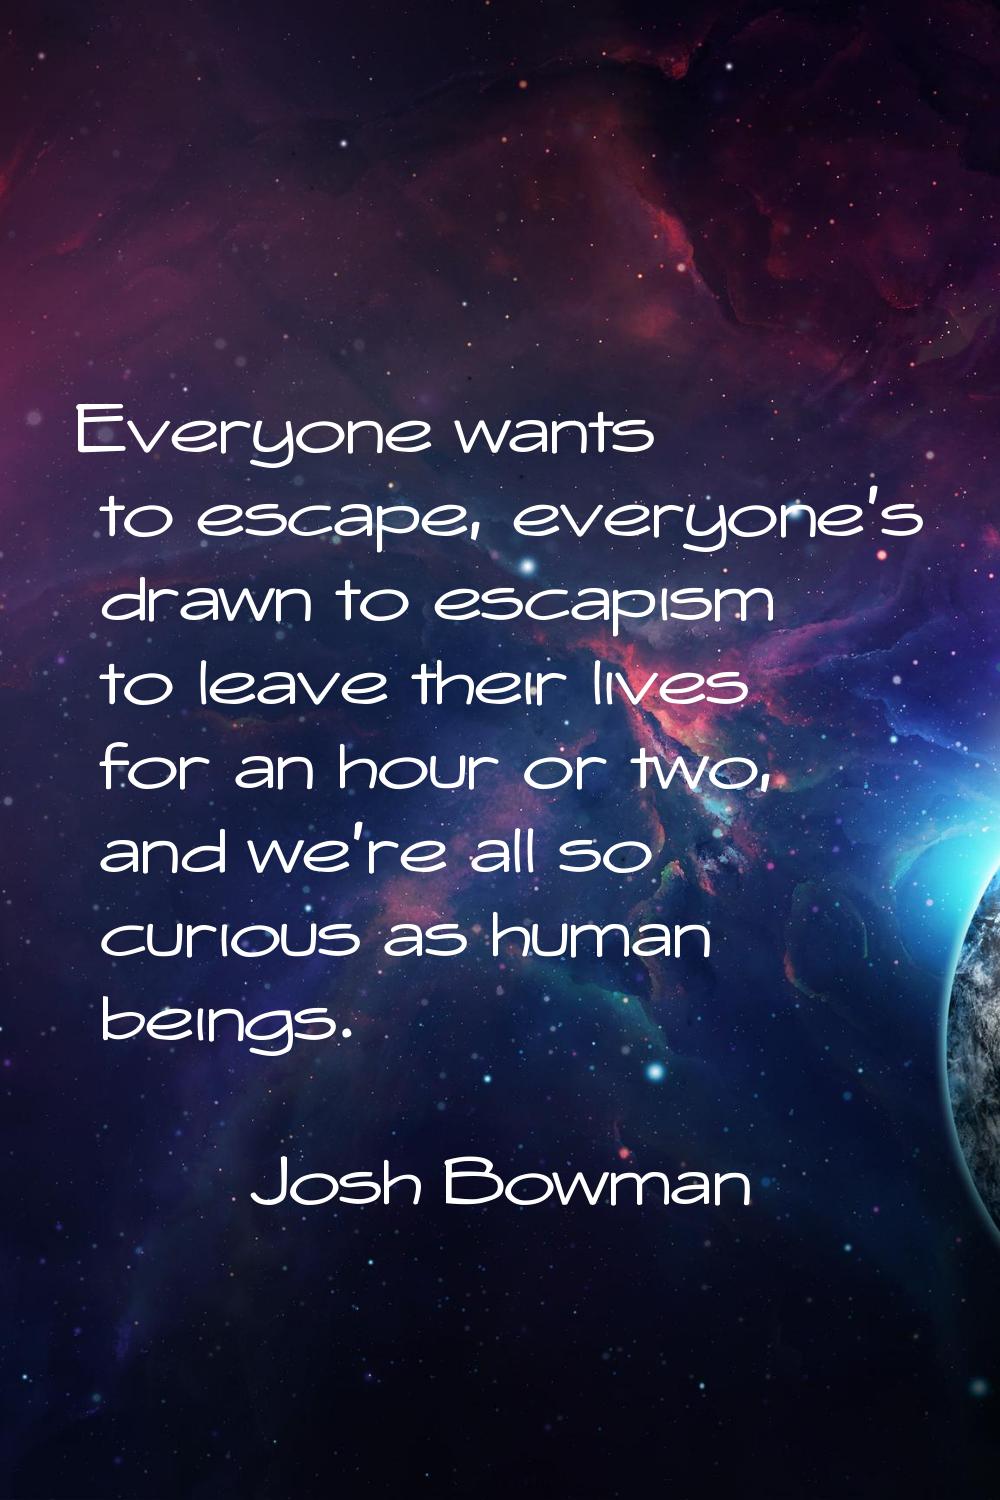 Everyone wants to escape, everyone's drawn to escapism to leave their lives for an hour or two, and